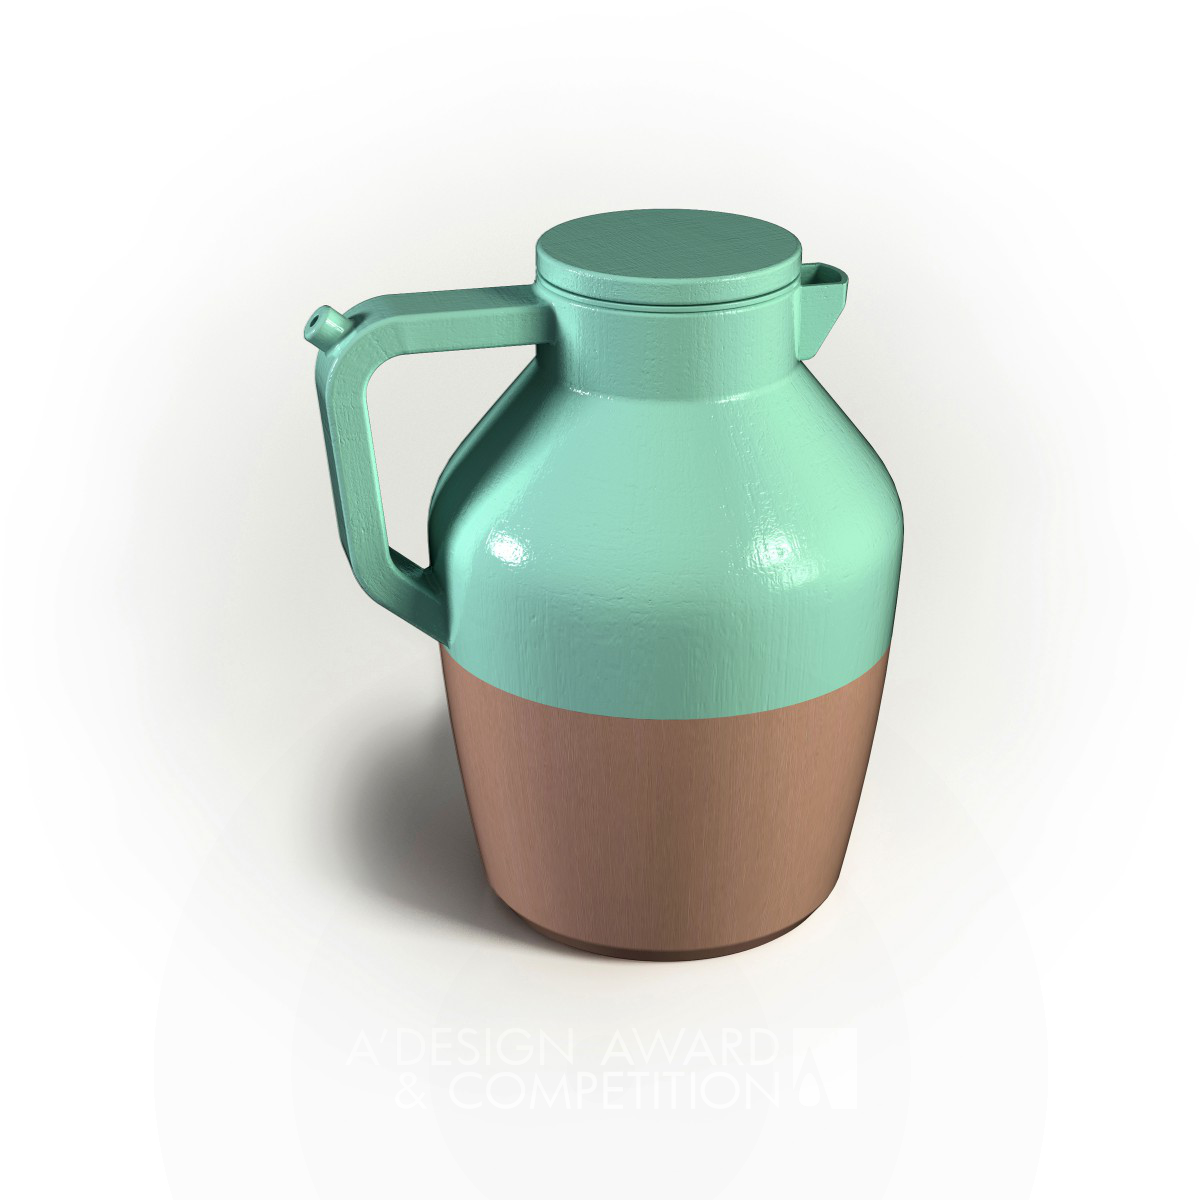 hanga water filter pitcher by Balazs Toth